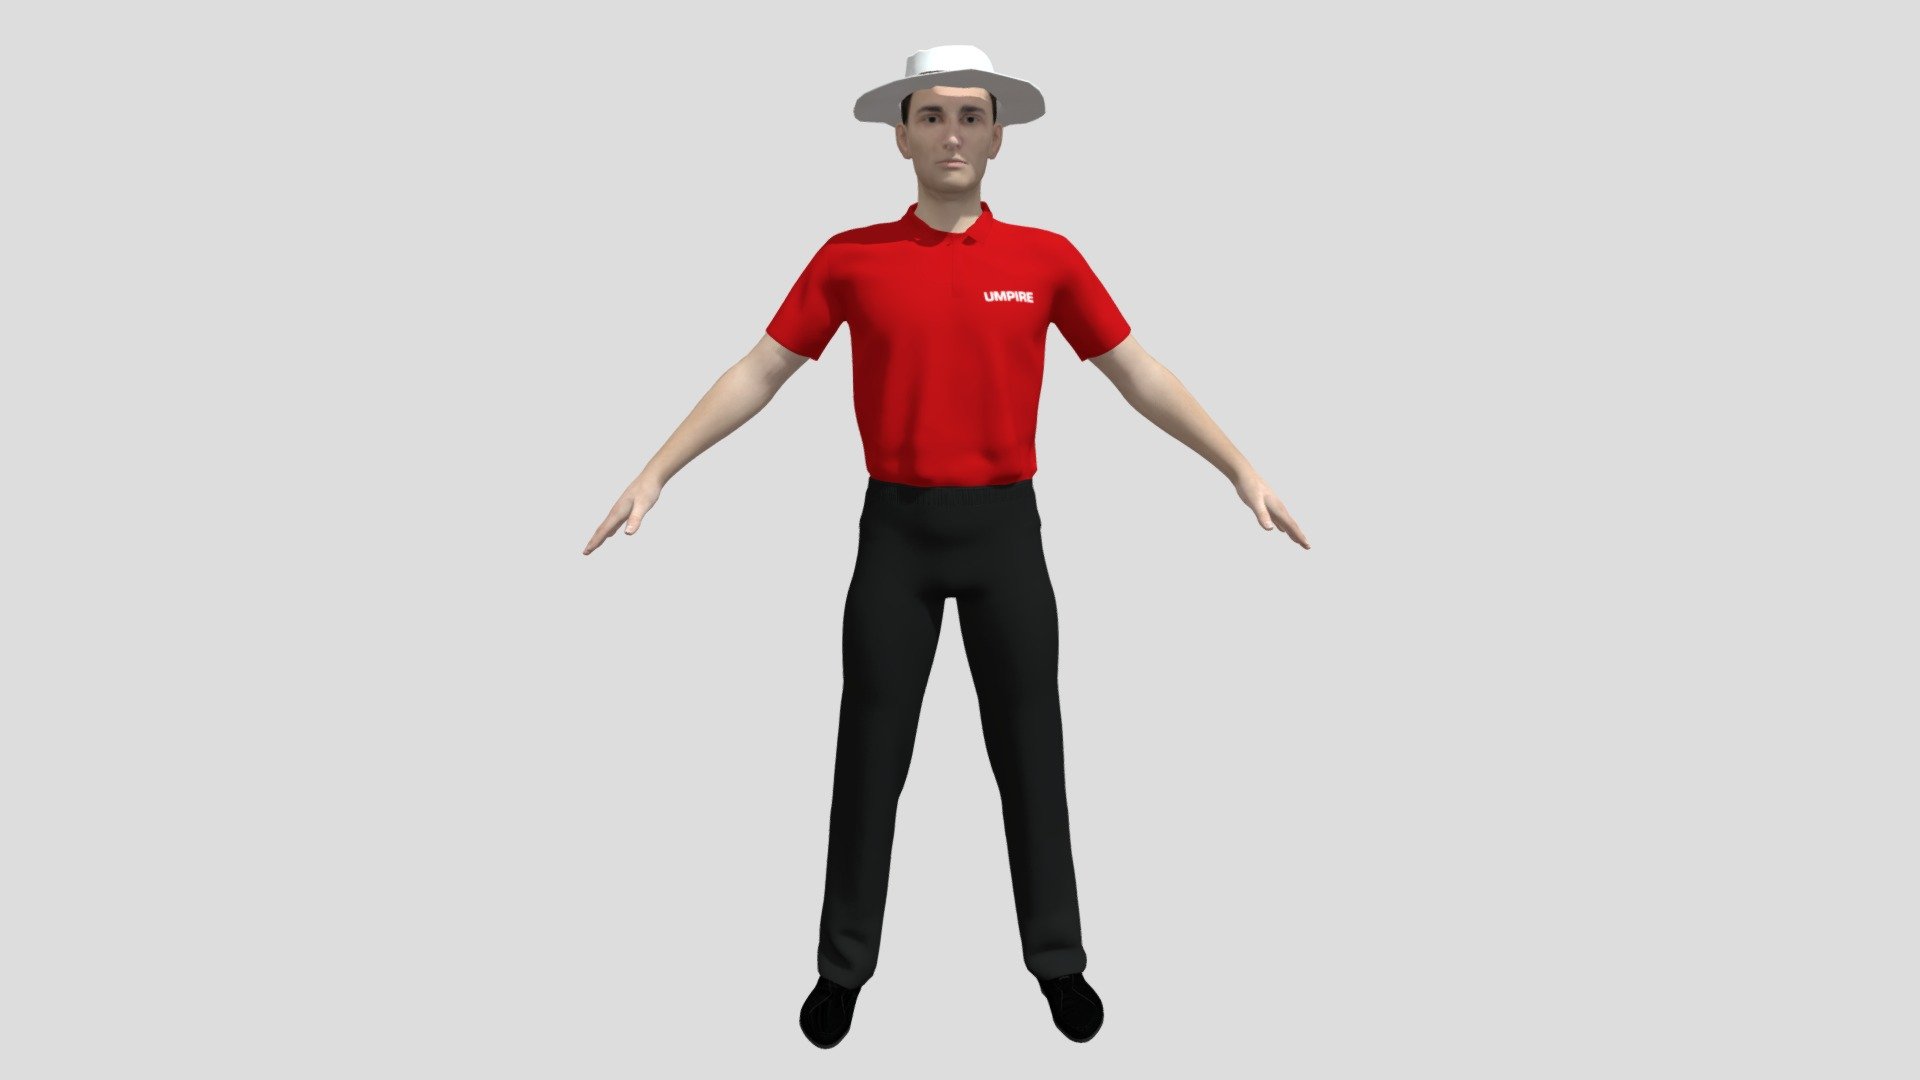 Cricket Umpire 3D model is a high quality, photo real model that will enhance detail and realism to any of your game projects or commercials. The model has a fully textured, detailed design that allows for close-up renders 3d model